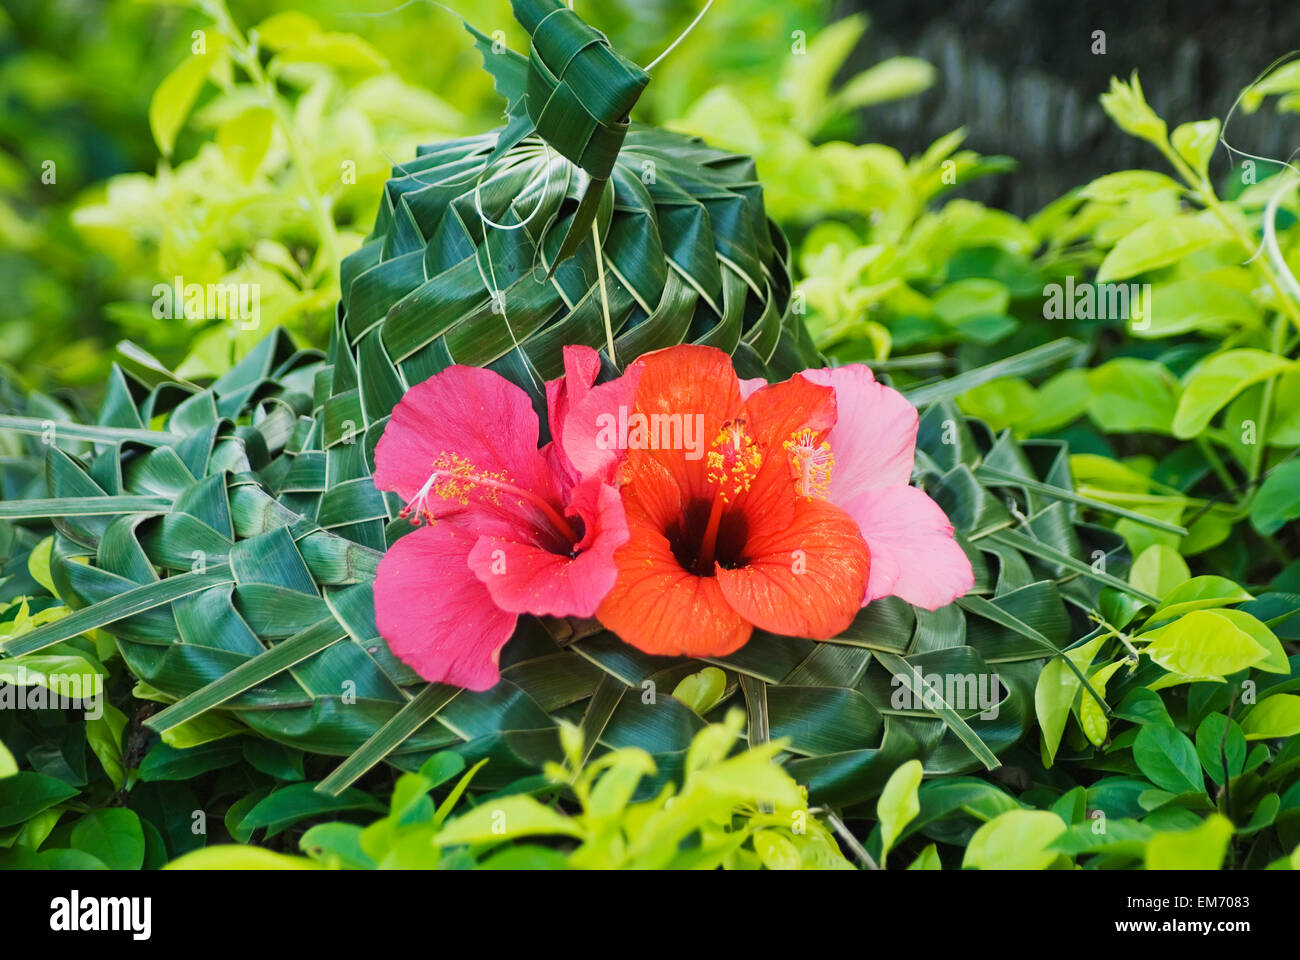 Green Lauhala Hat With Red And Pink Hibiscus Flowers. Stock Photo